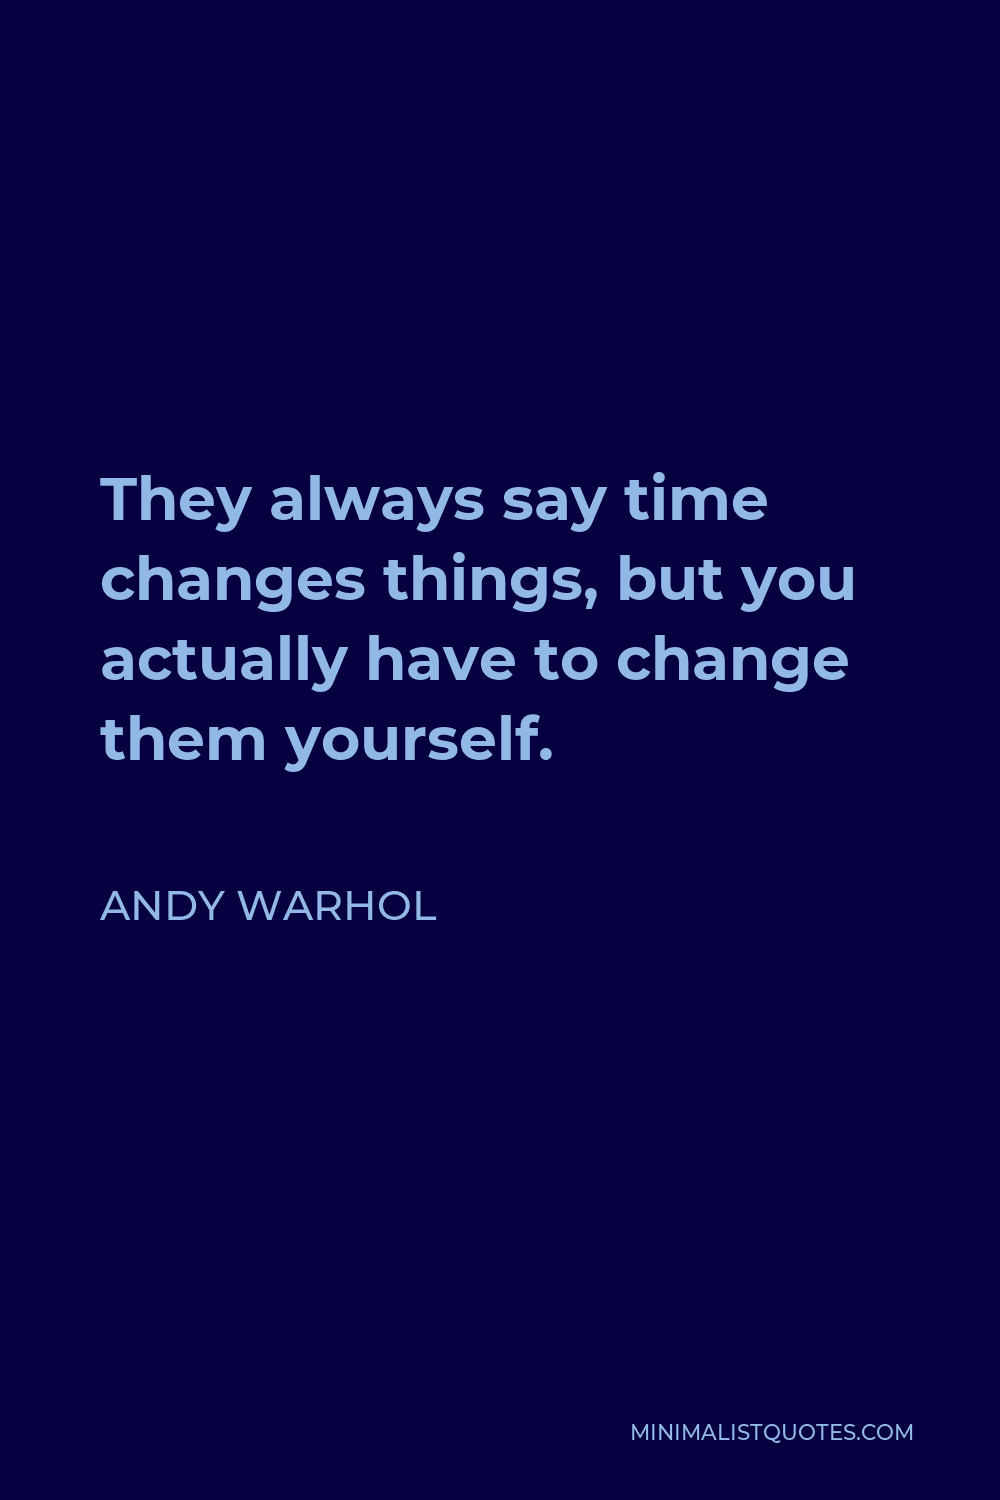 Andy Warhol Quote - They always say time changes things, but you actually have to change them yourself.